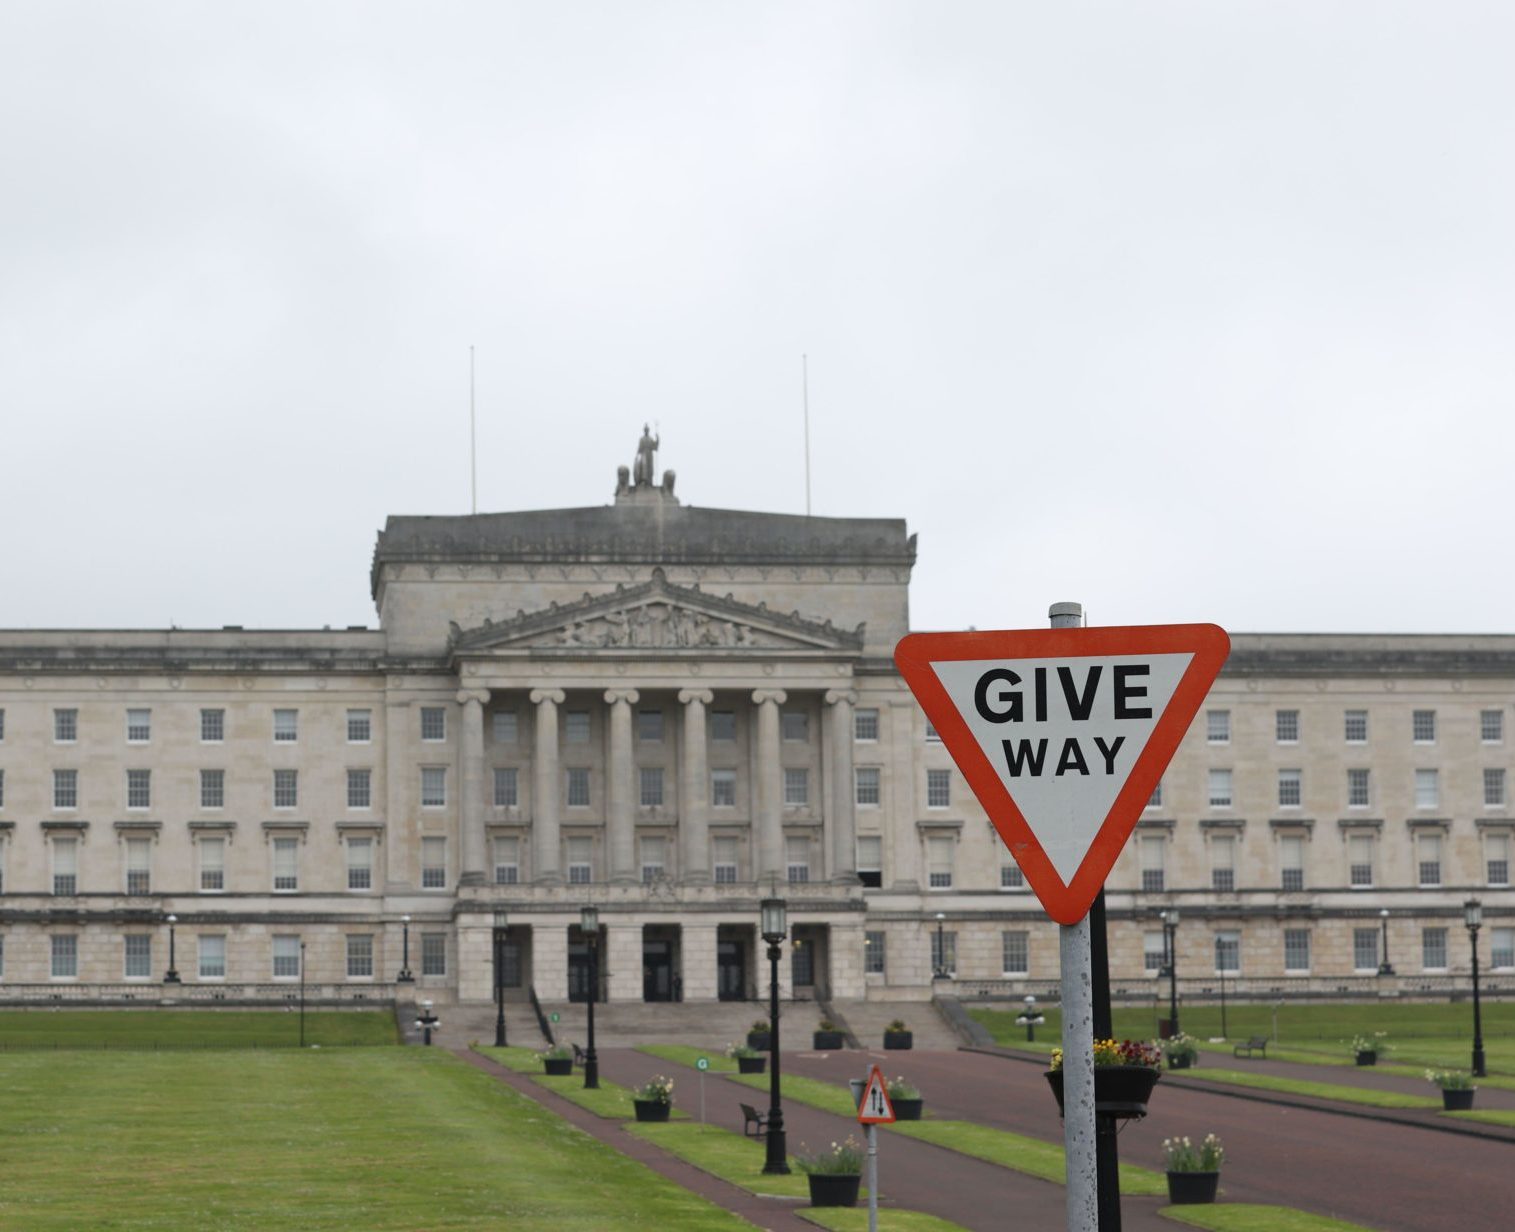 A 'Give Way sign' at the Stormont parliament buildings in Belfast, Northern Ireland on May 9th 2022.